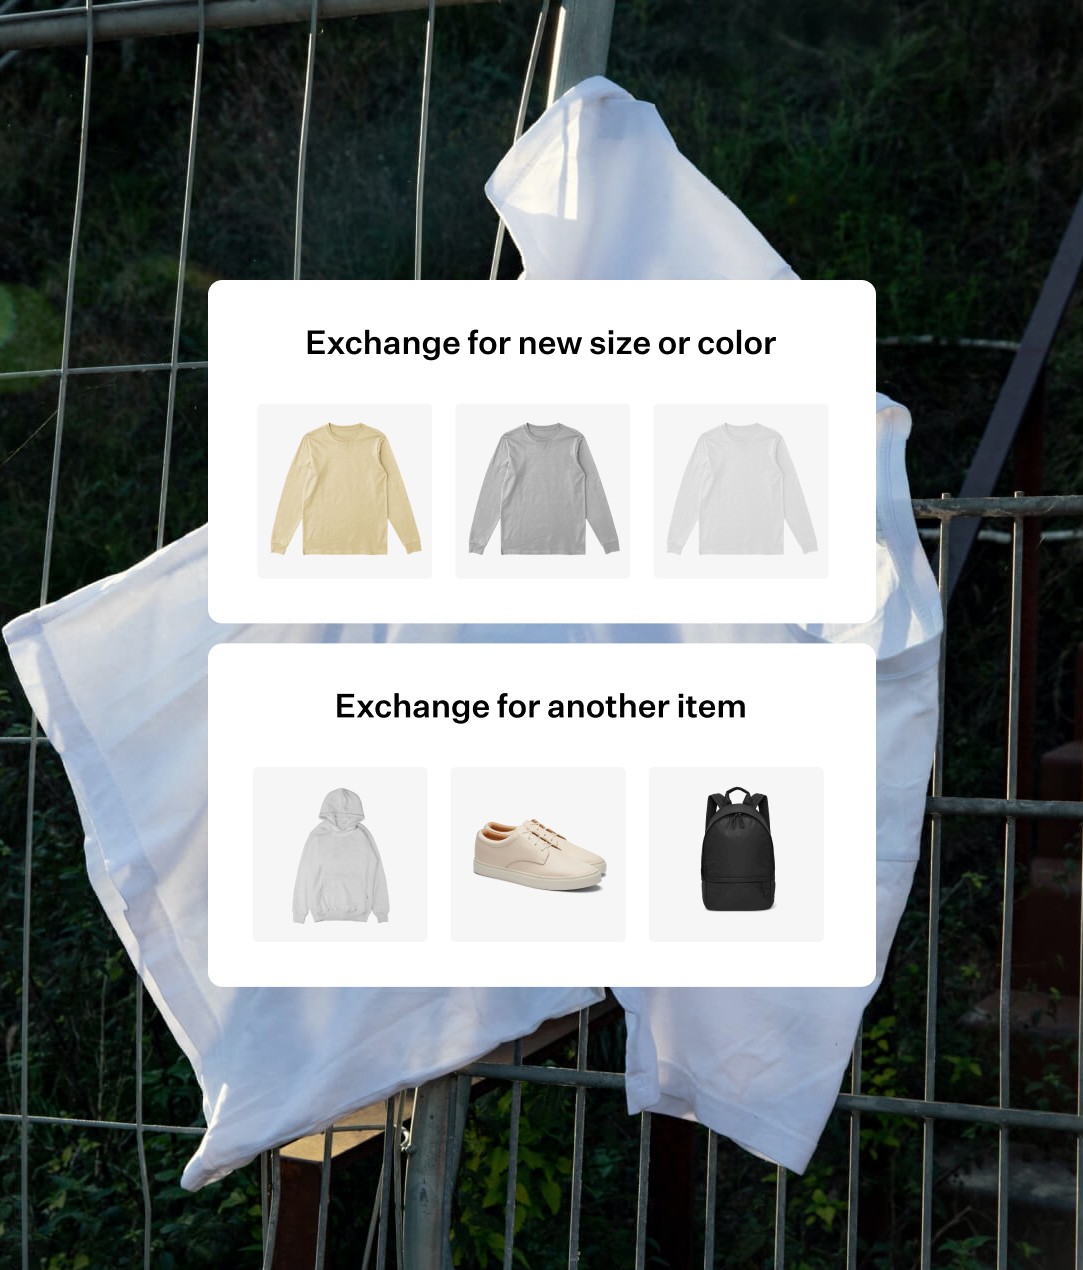 Exchange Optimized Flow, for new size, color or another item